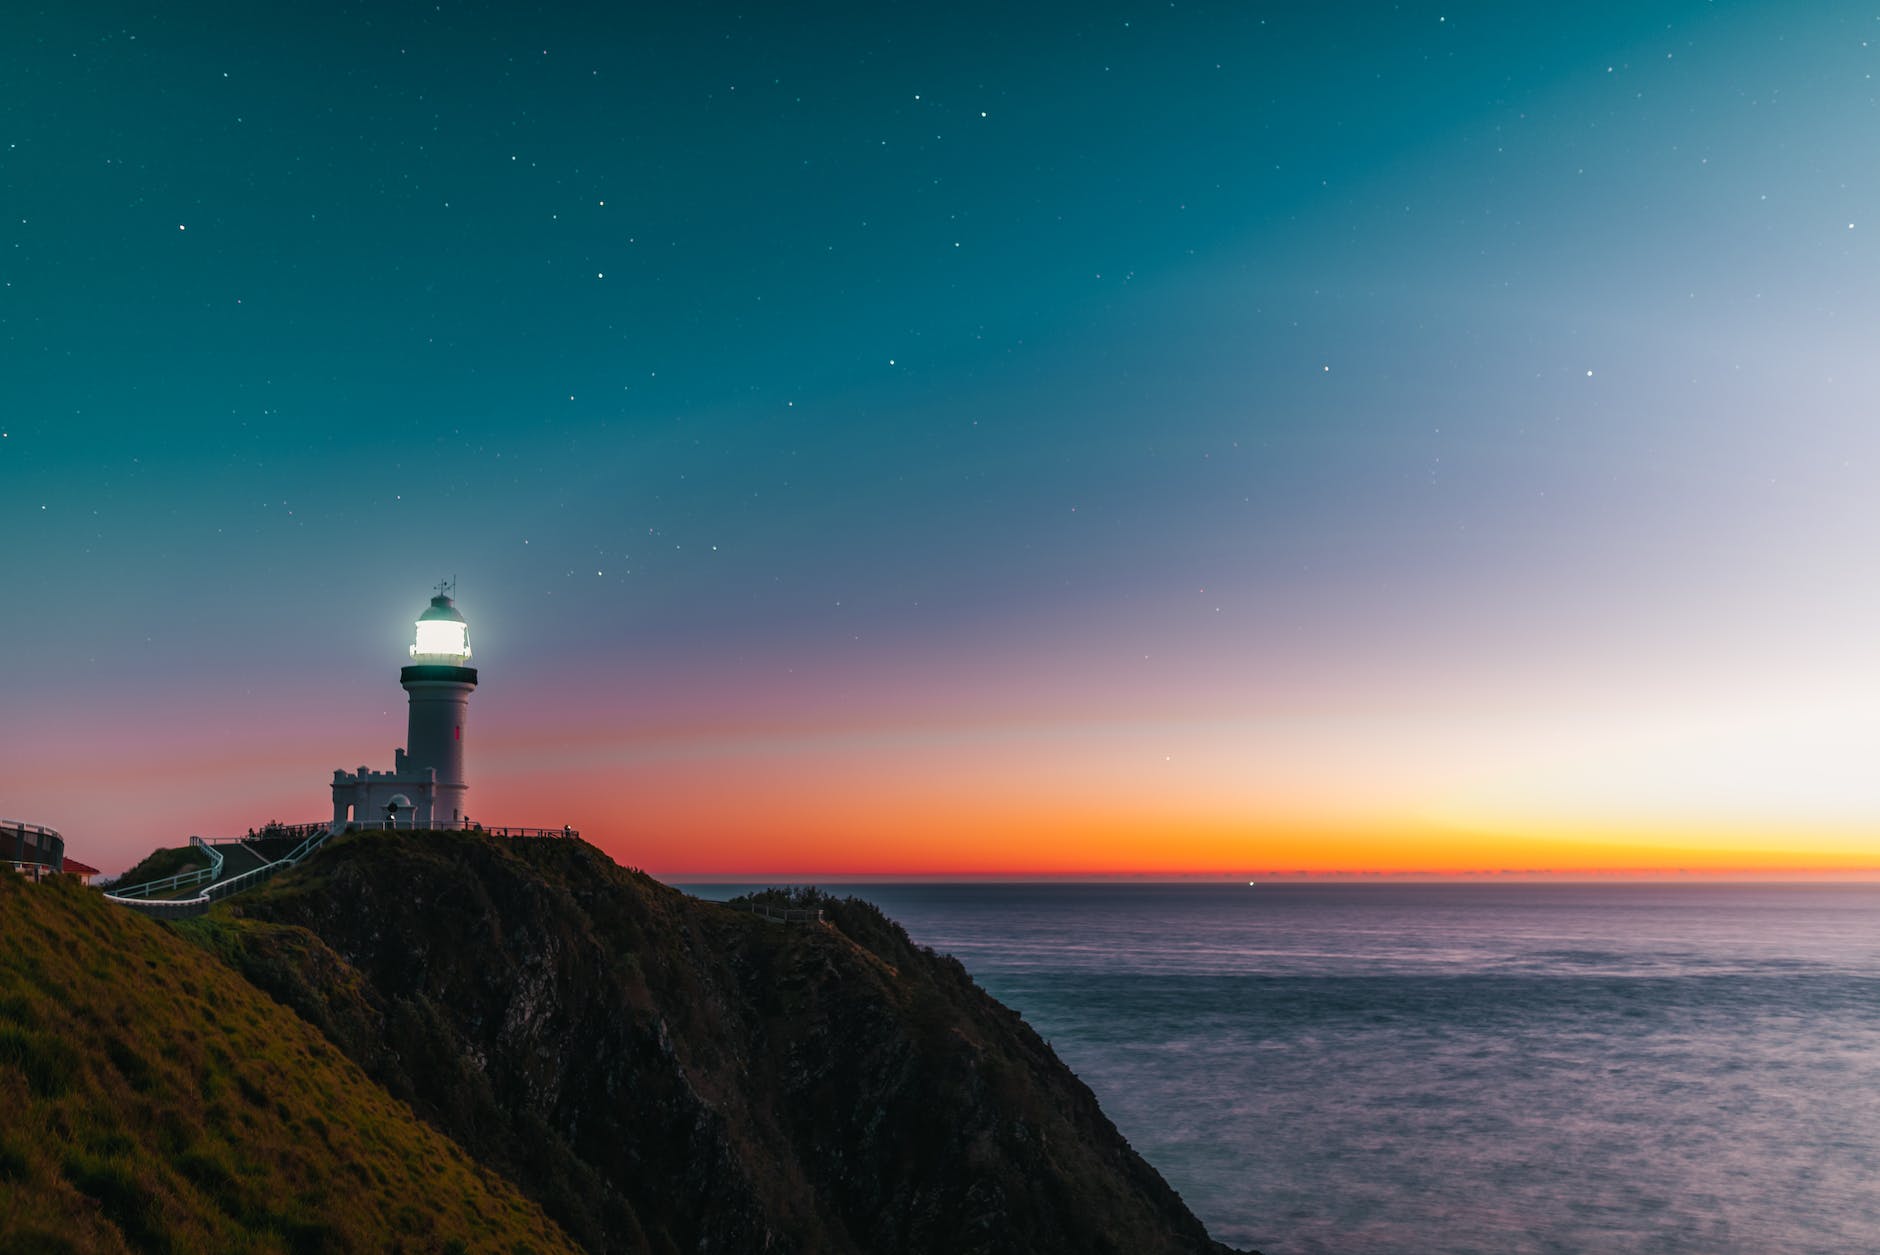 sunset sky over sea and lighthouse located on hill